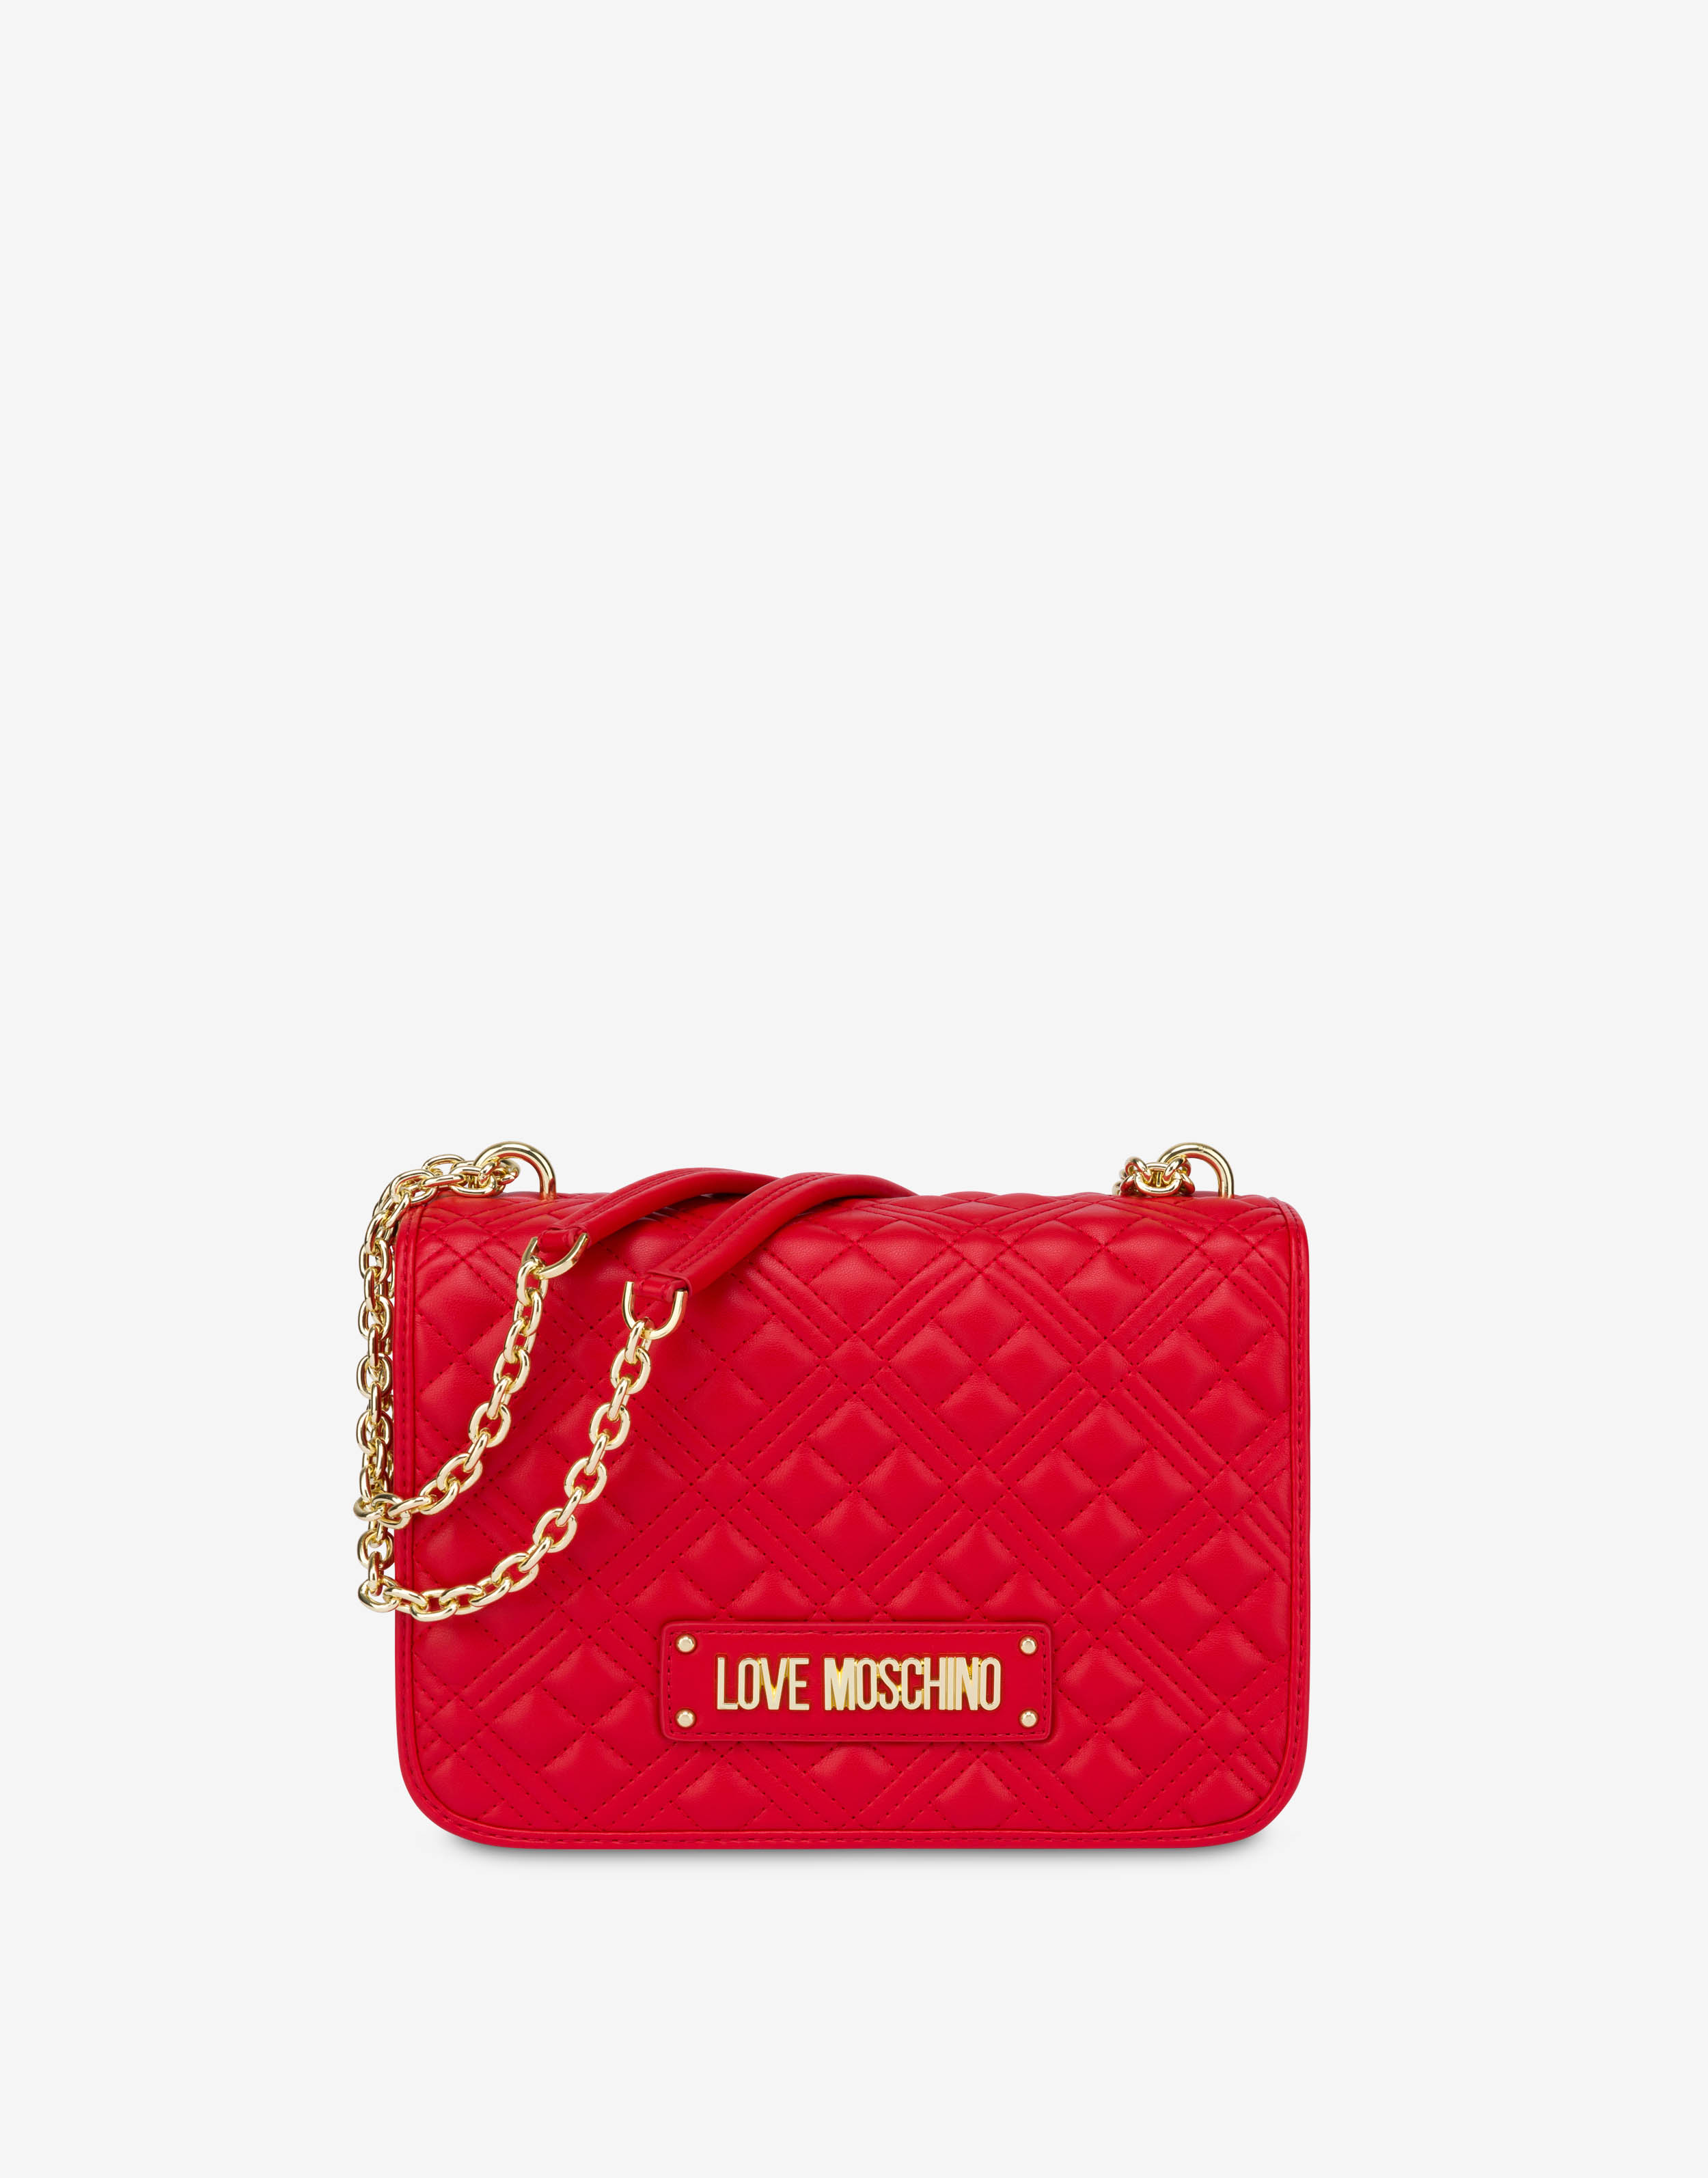 Love Moschino Bags for New Season - Official Store